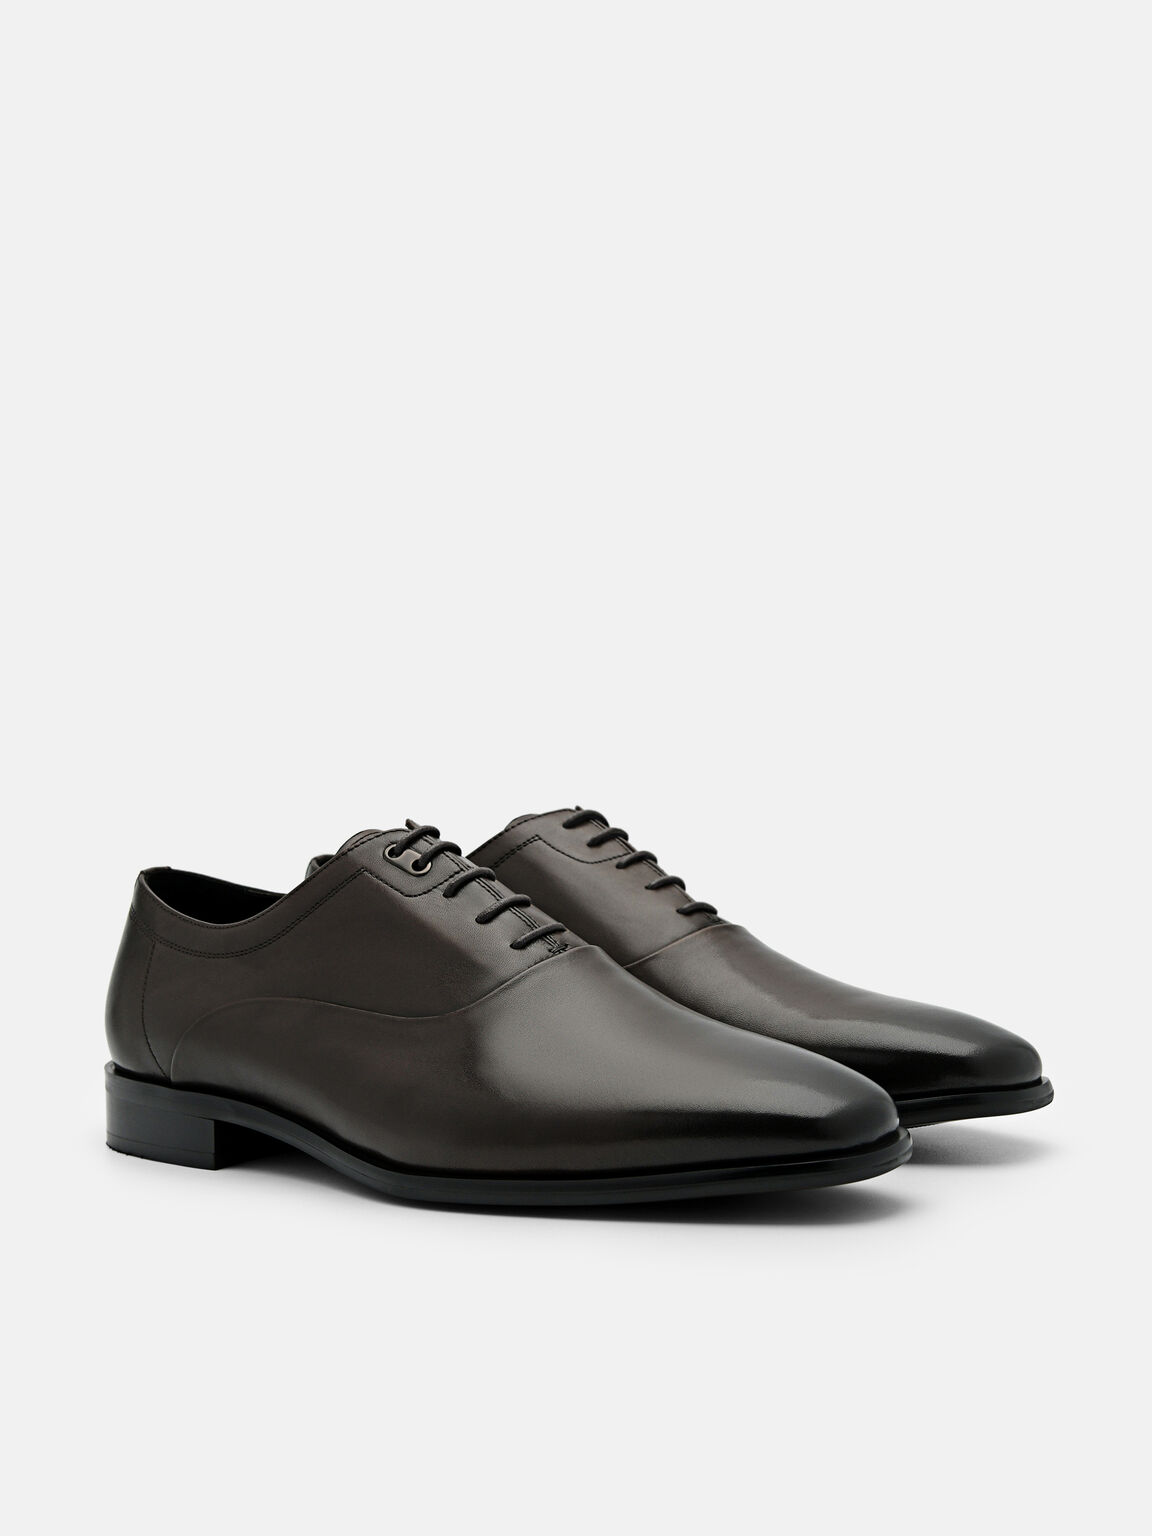 Leather Oxford Shoes, Dark Brown, hi-res